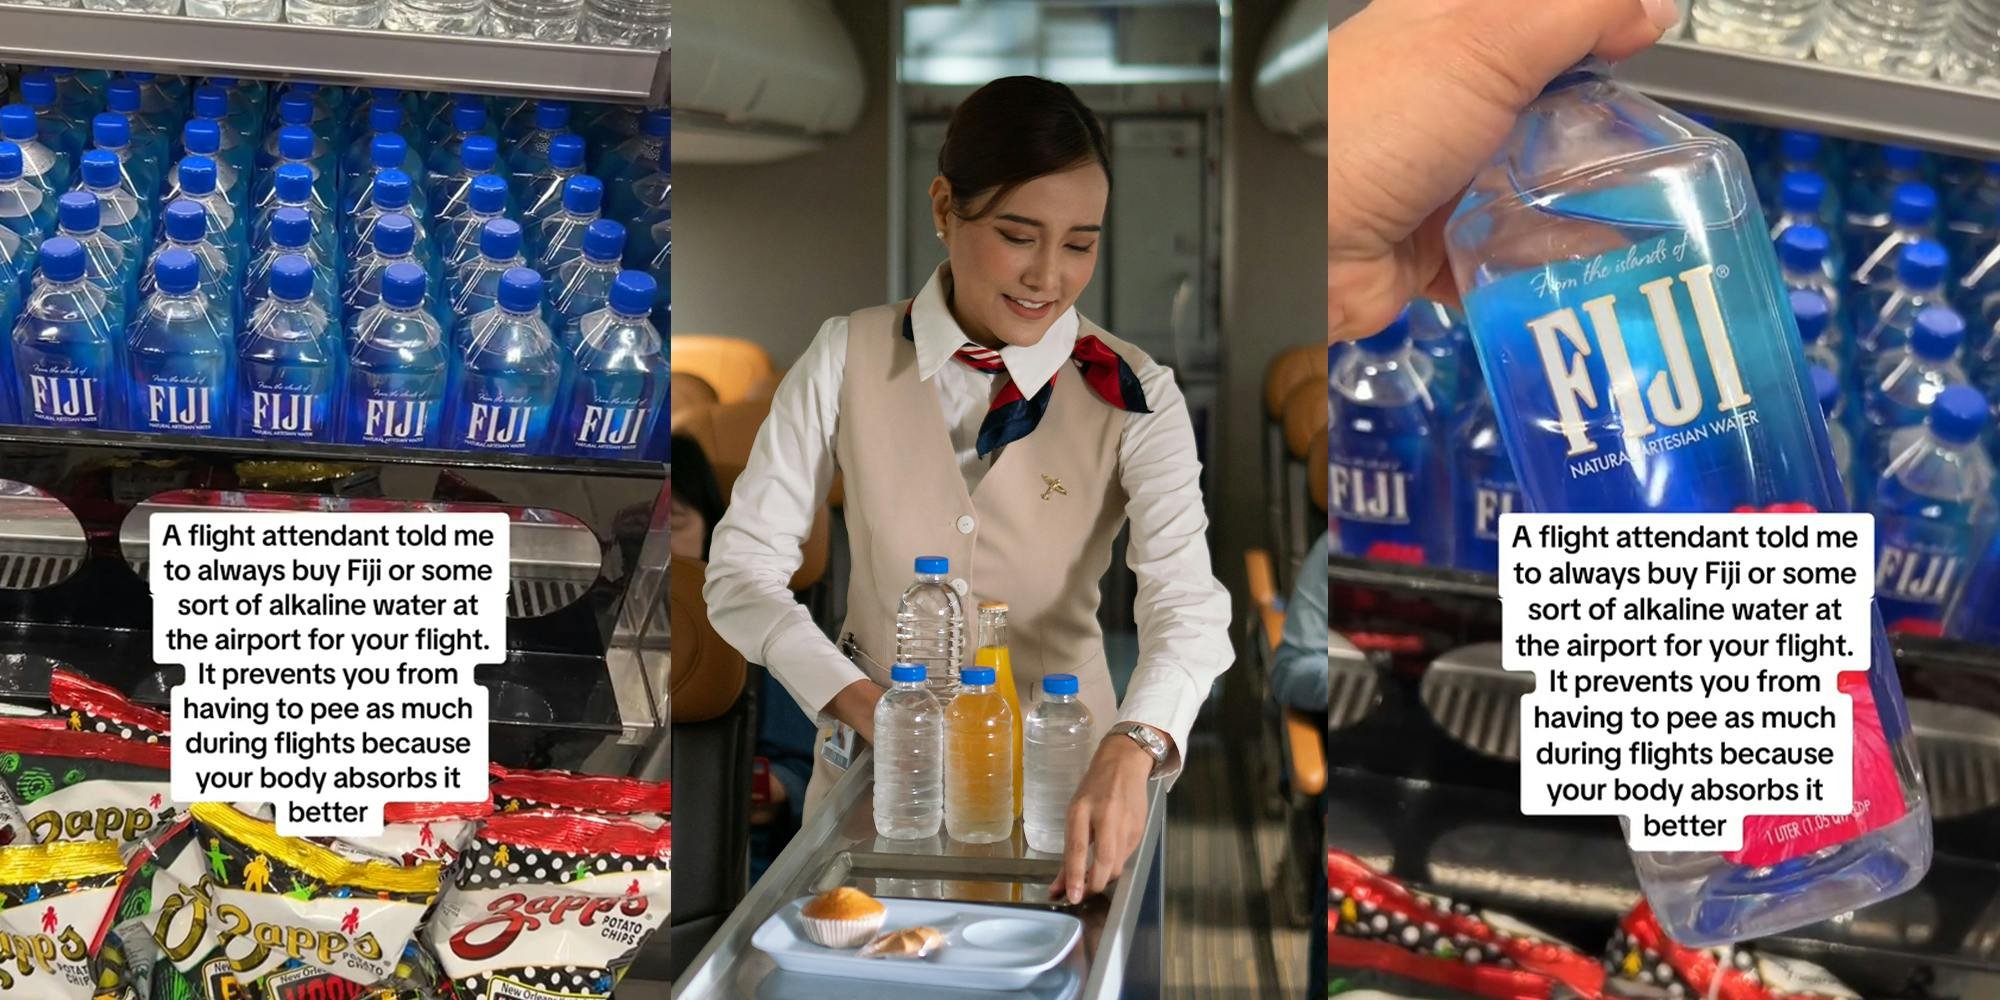 'A flight attendant told me to always buy Fiji': Customer shares water hack to stop bathroom trips on flights. Viewers are skeptical